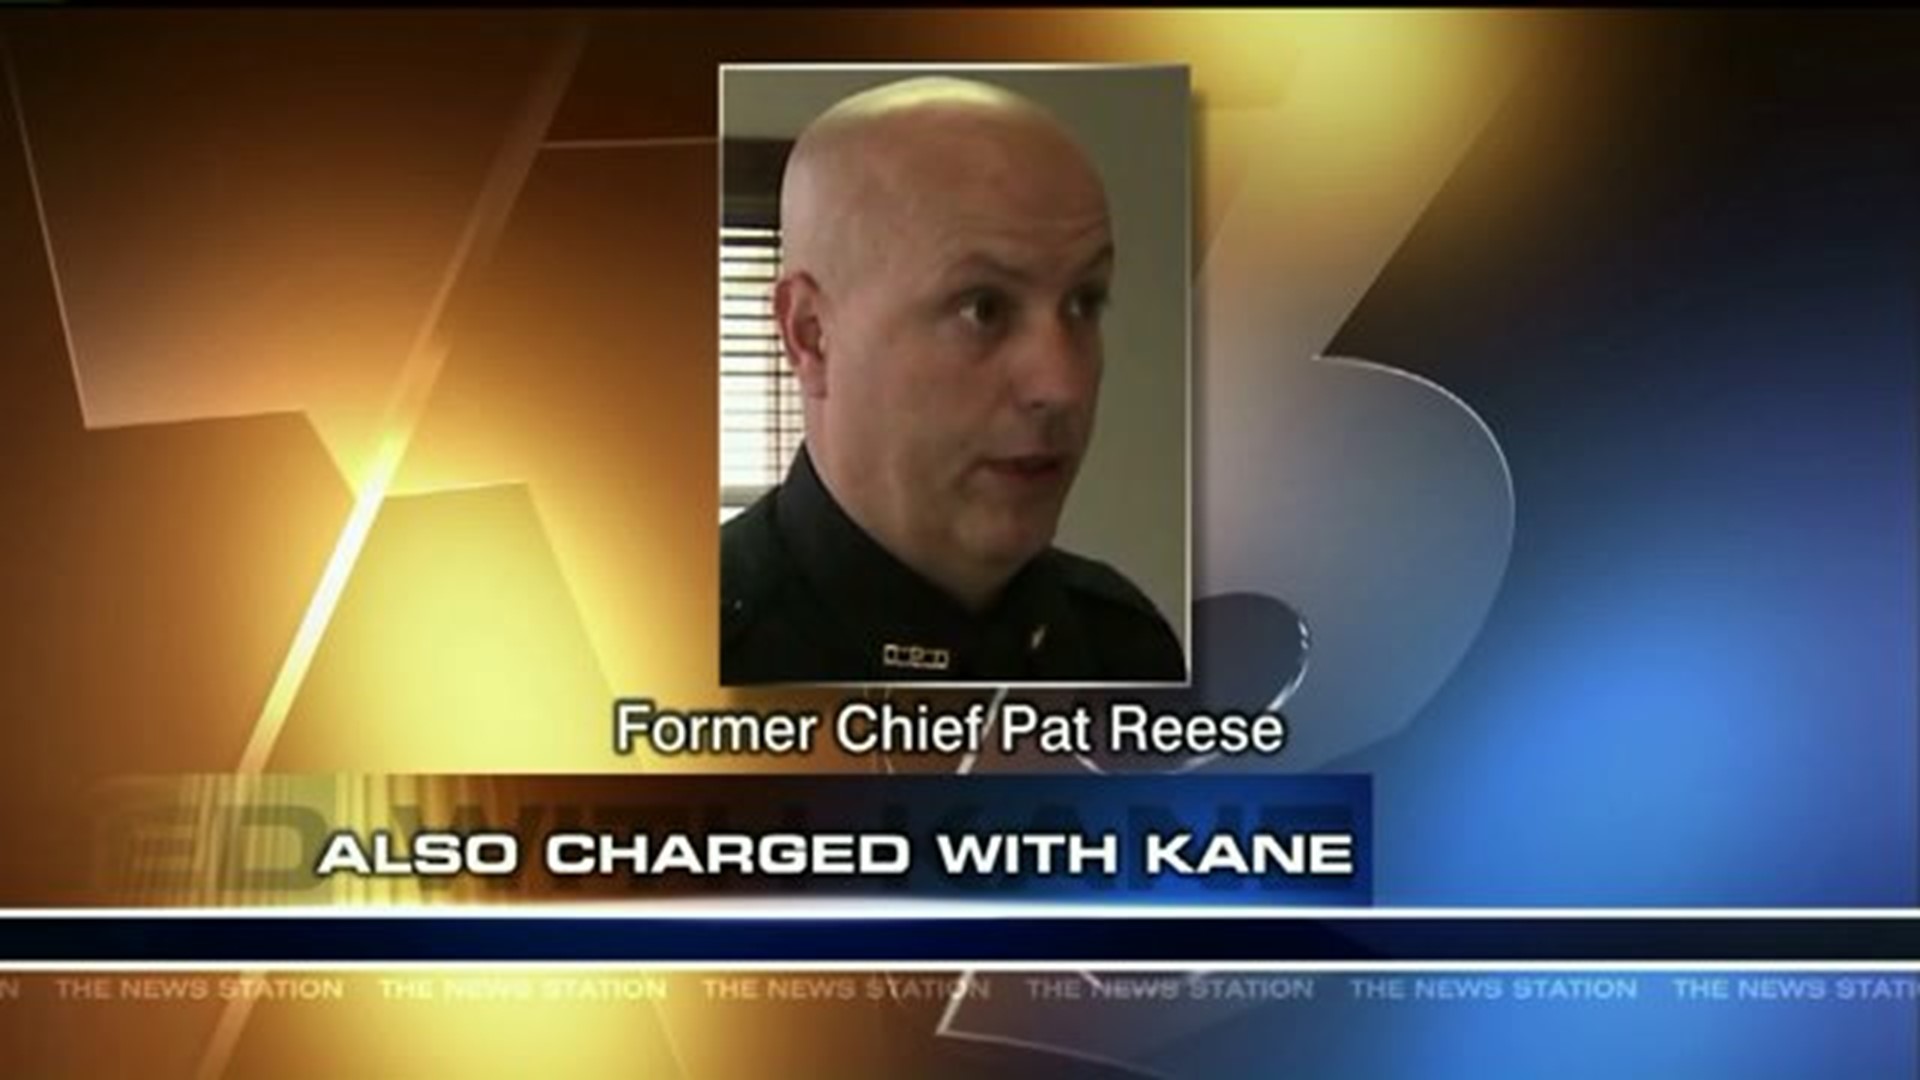 Former Police Chief Charged in Kane Investigation